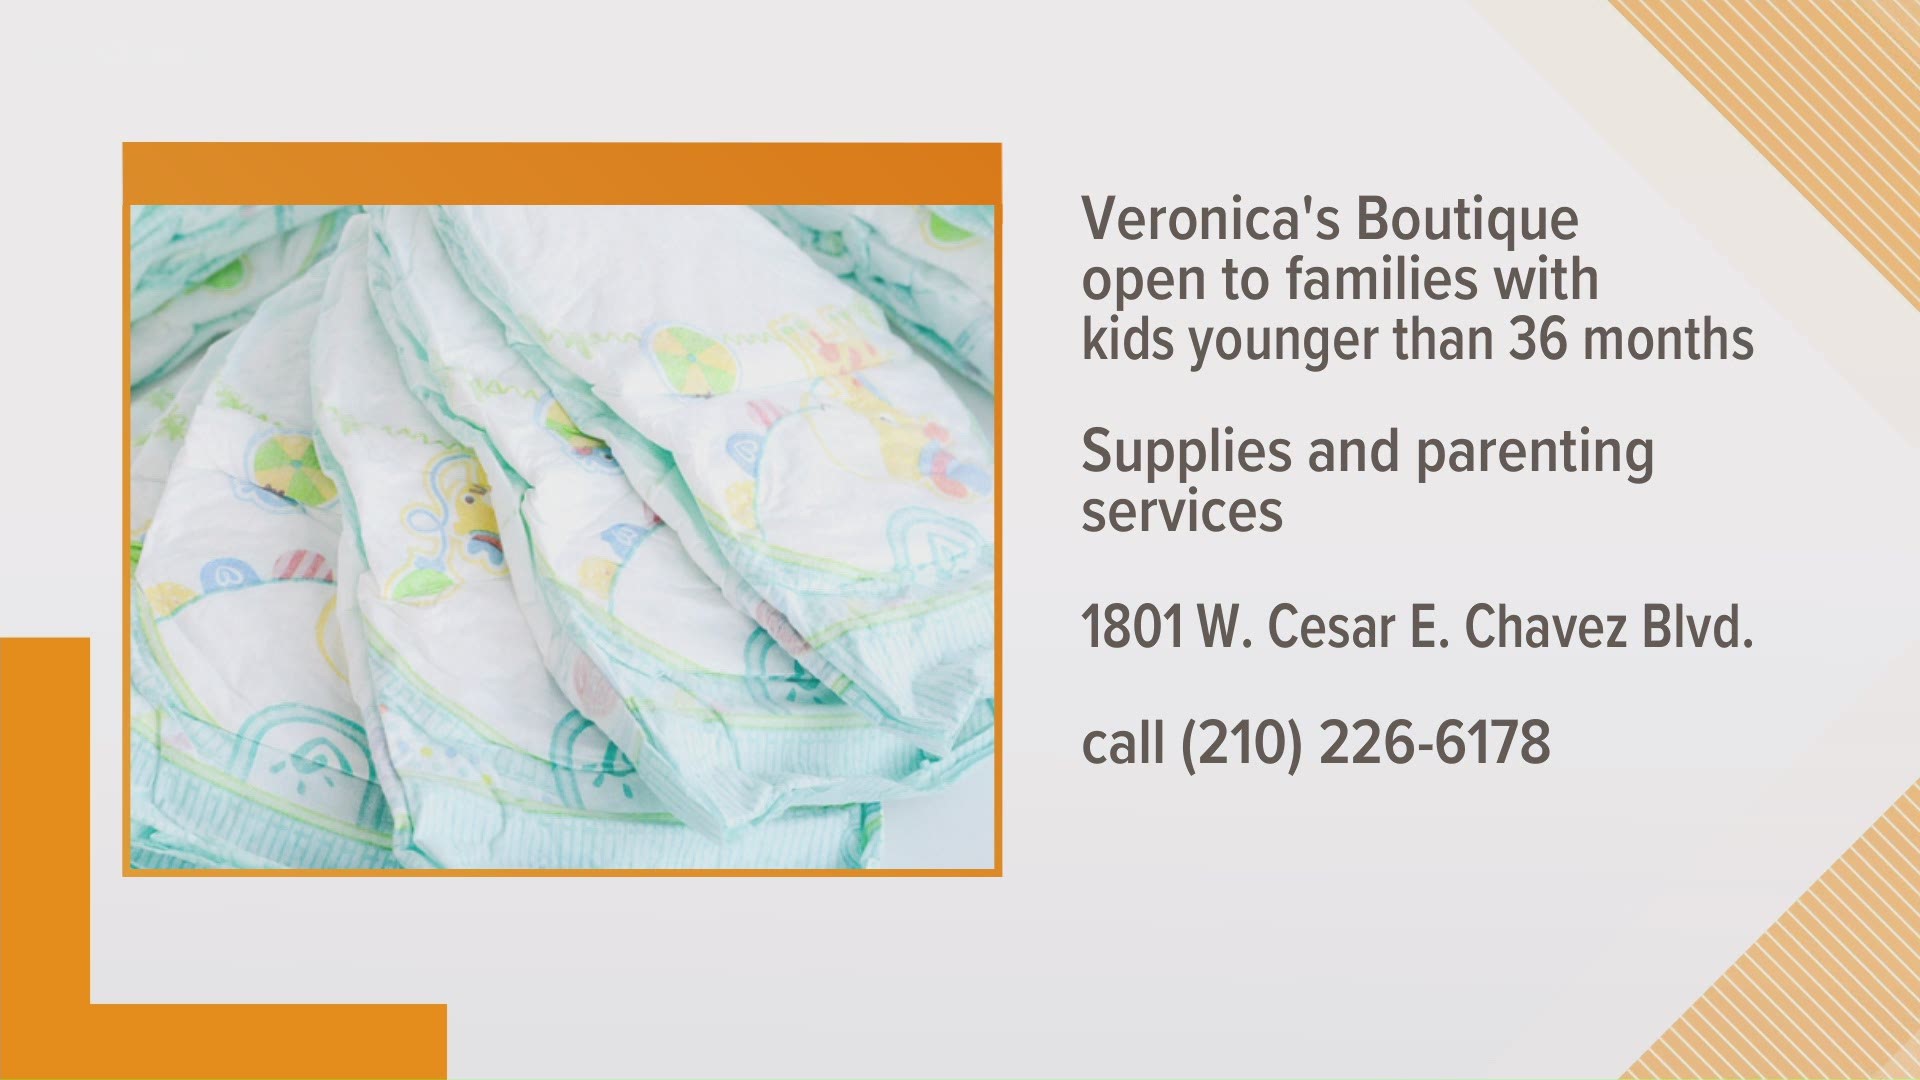 Veronica's Boutique is a new program to help families in need.